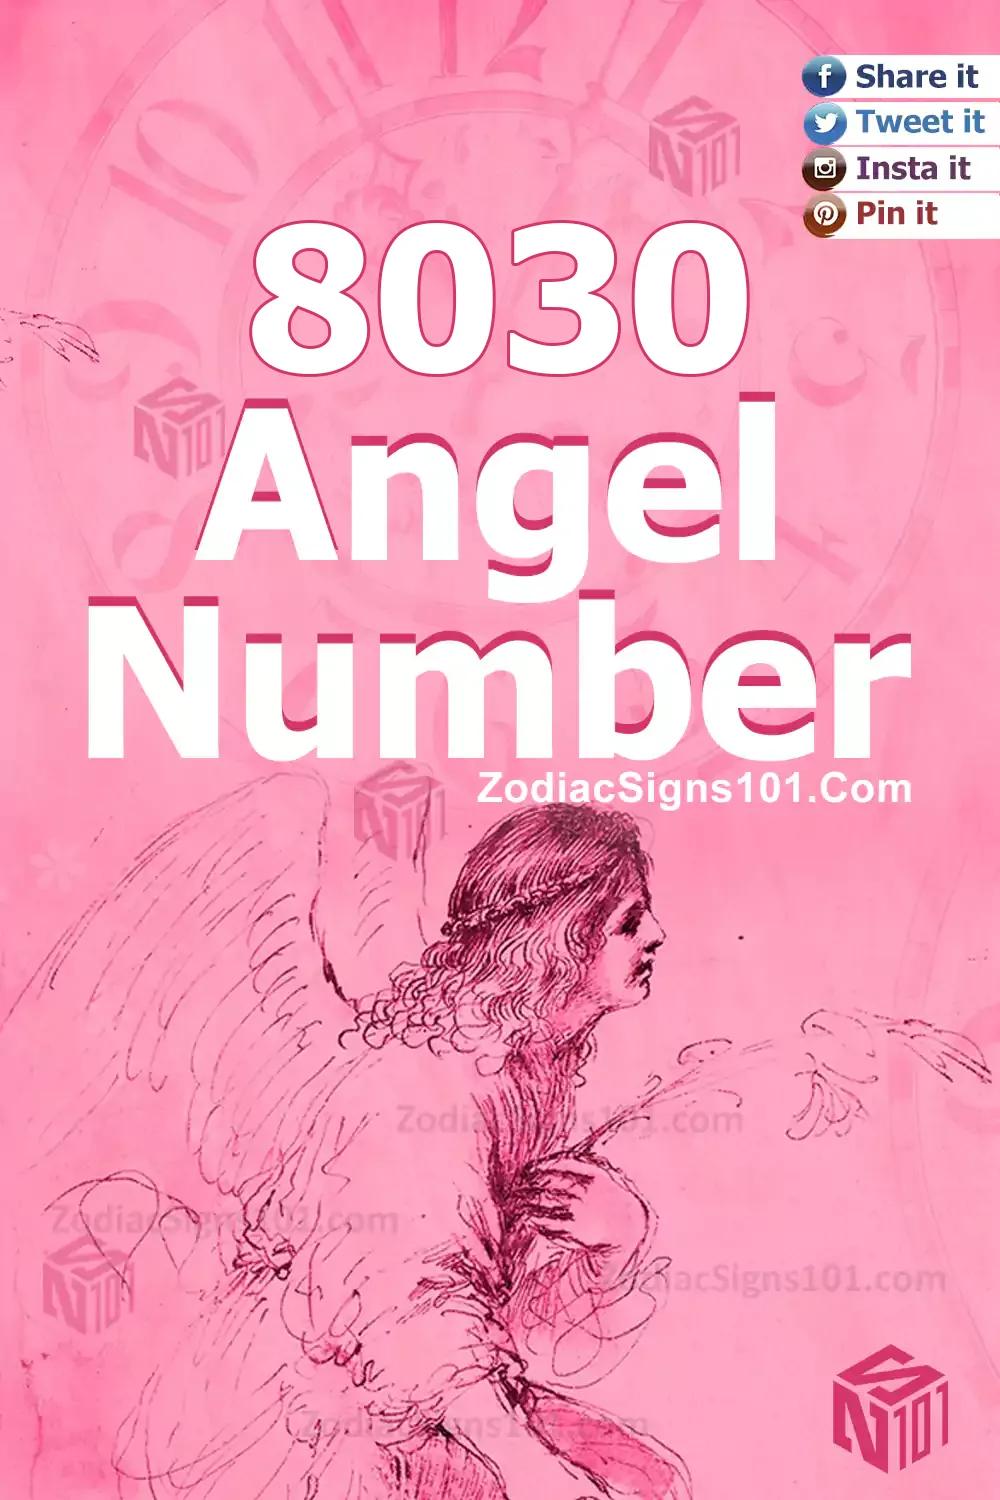 8030 Angel Number Meaning